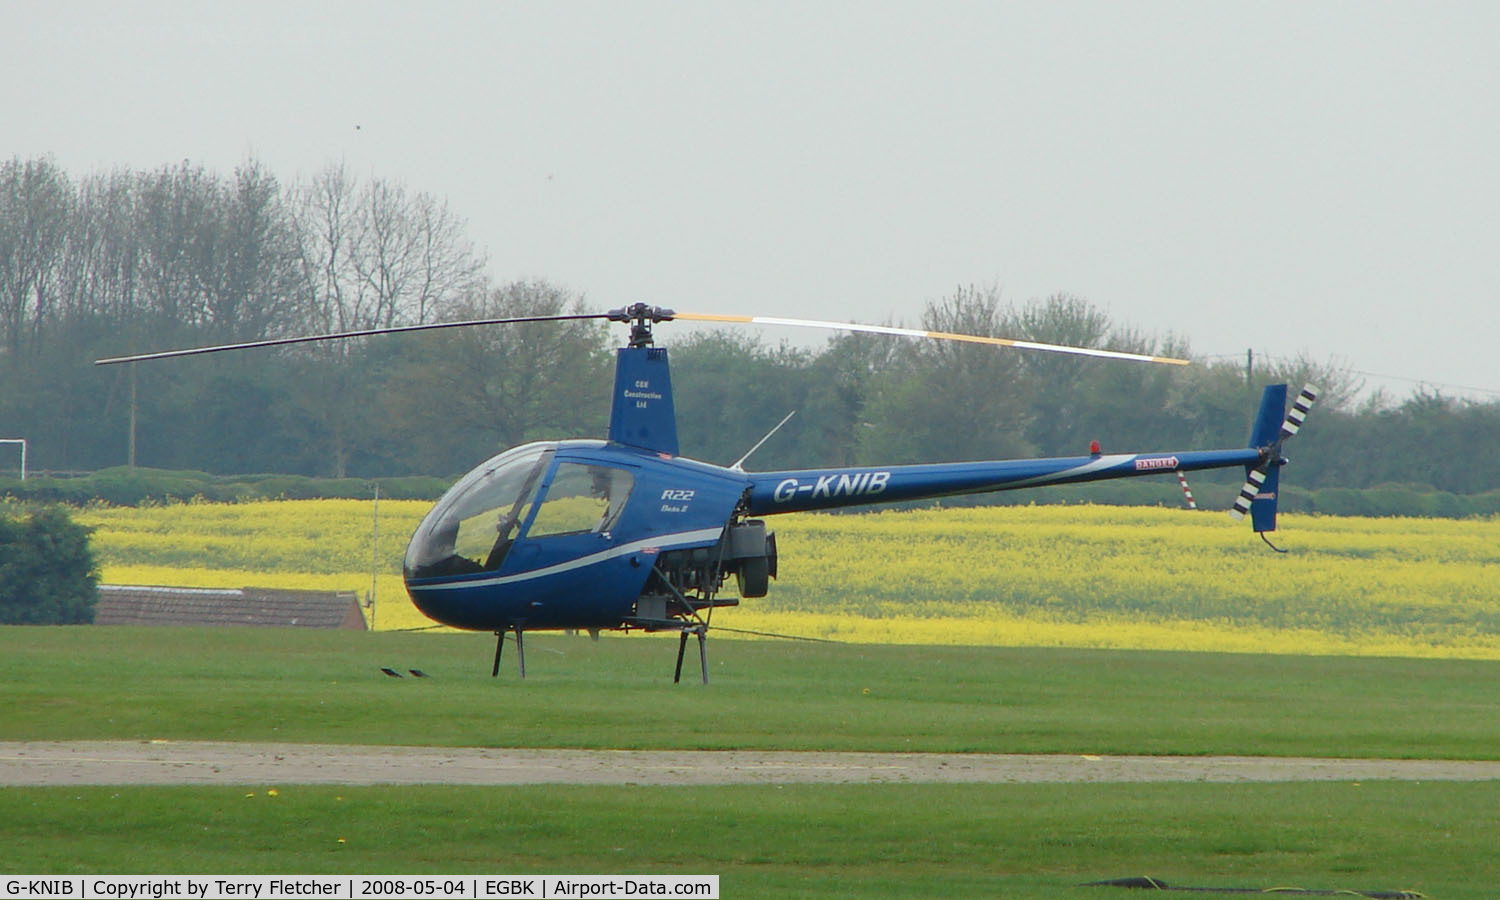 G-KNIB, 2000 Robinson R22 Beta C/N 3145, part of the Sywell GA scene on Tiger Moth Fly-in Day in May 2008